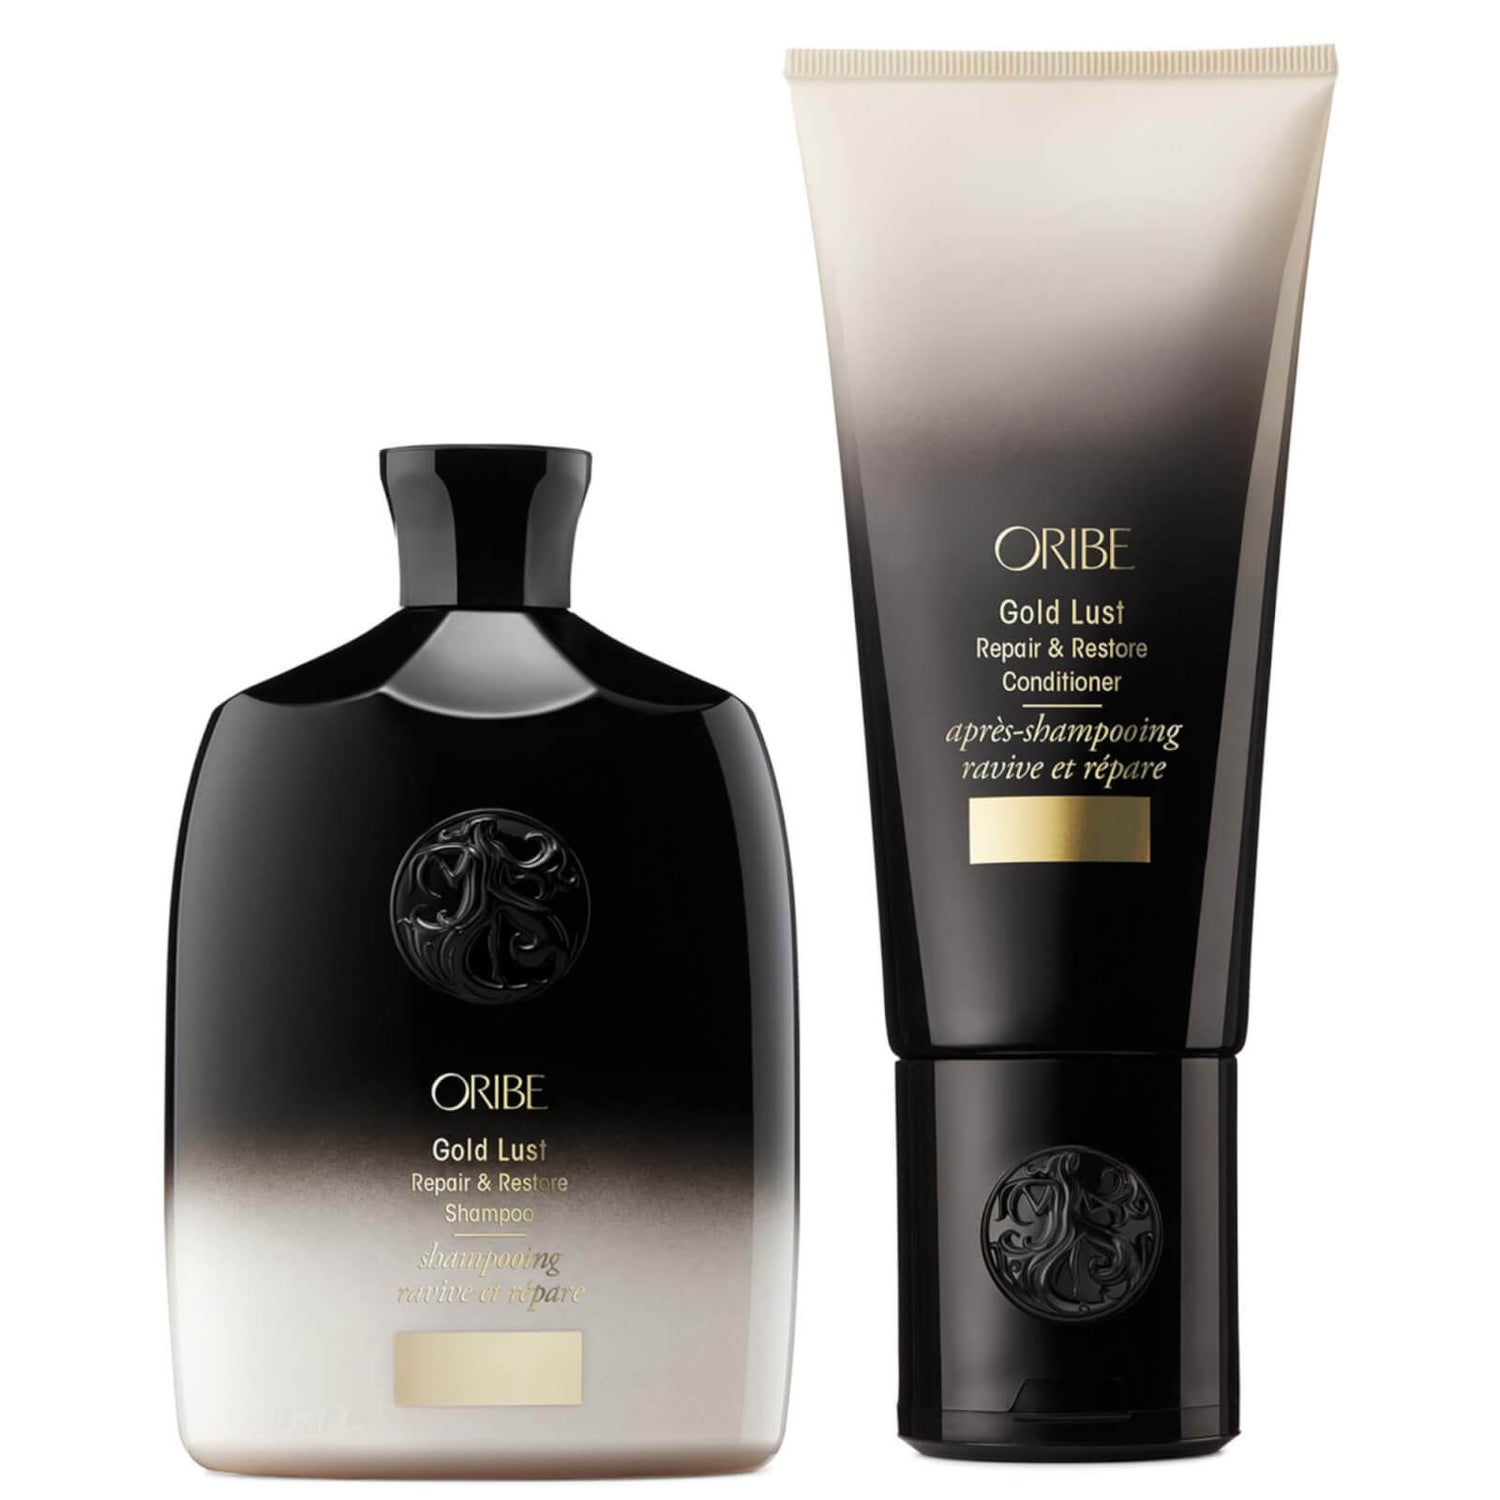 Oribe Gold Lust Repair and Restore Shampoo and Conditioner Bundle